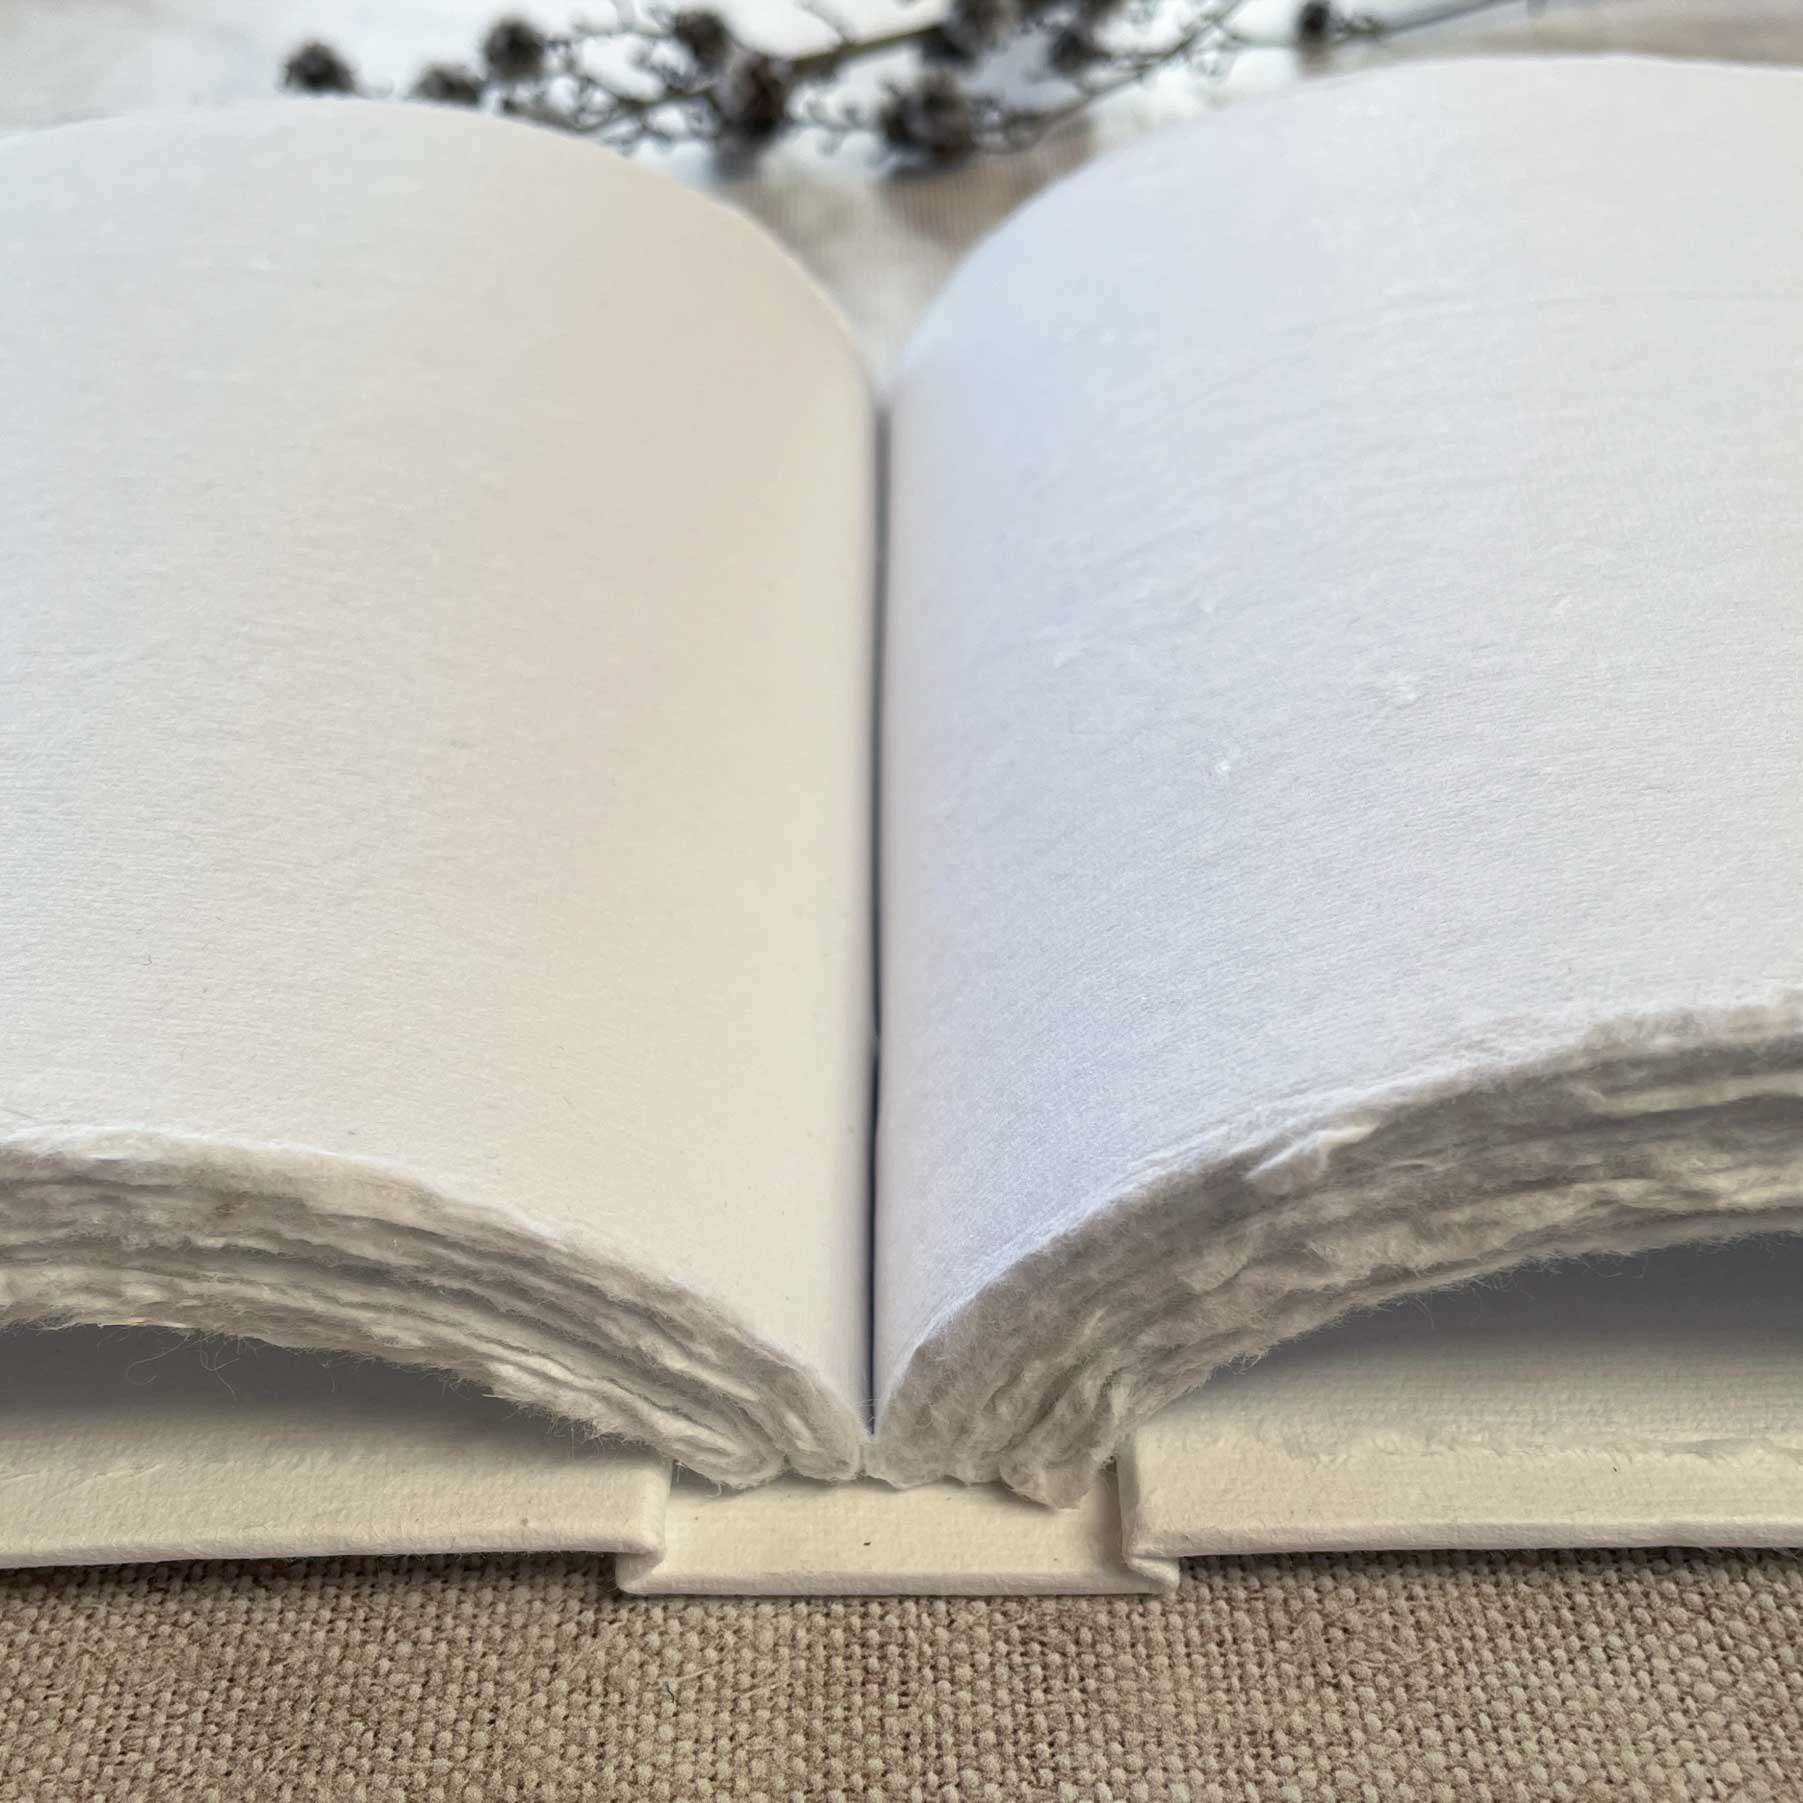 handmade recycled cotton rag paper book with blank pages and blank cover.  Hard cover blank book.  Perfect for use as a guest book, notebook, journal or artist sketch pad